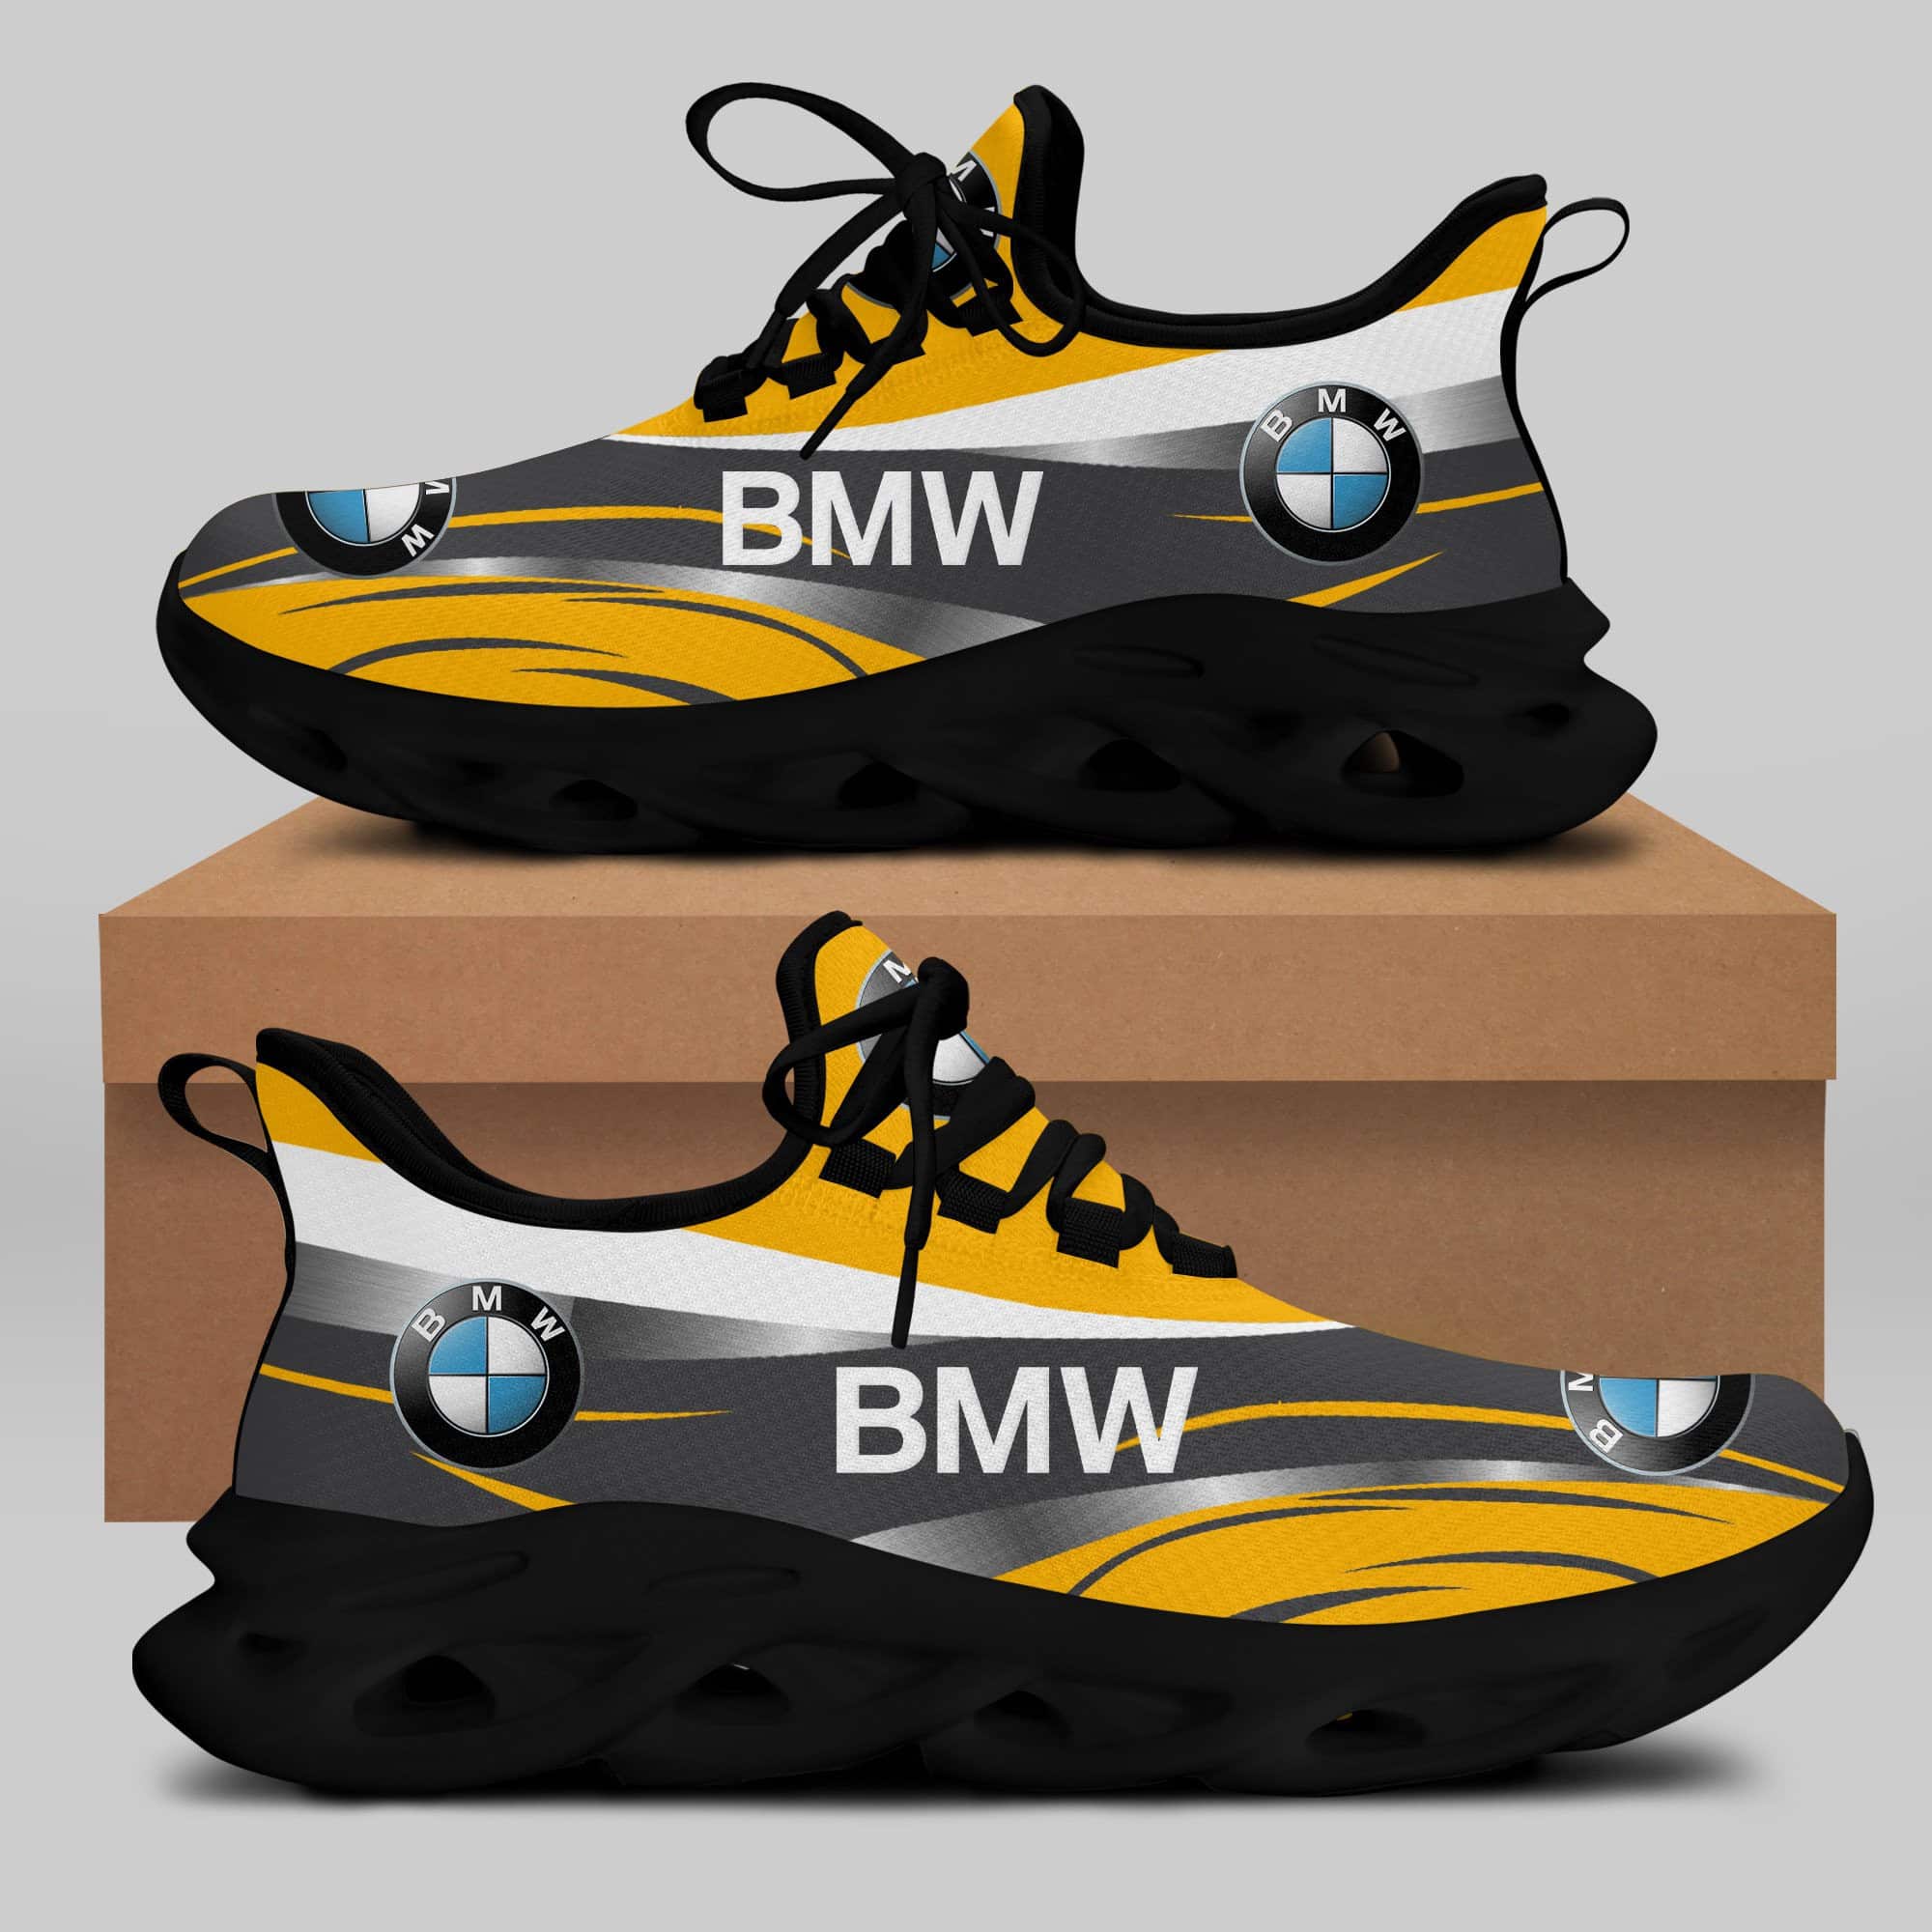 Bmw Running Shoes Max Soul Shoes Sneakers Ver 44 2